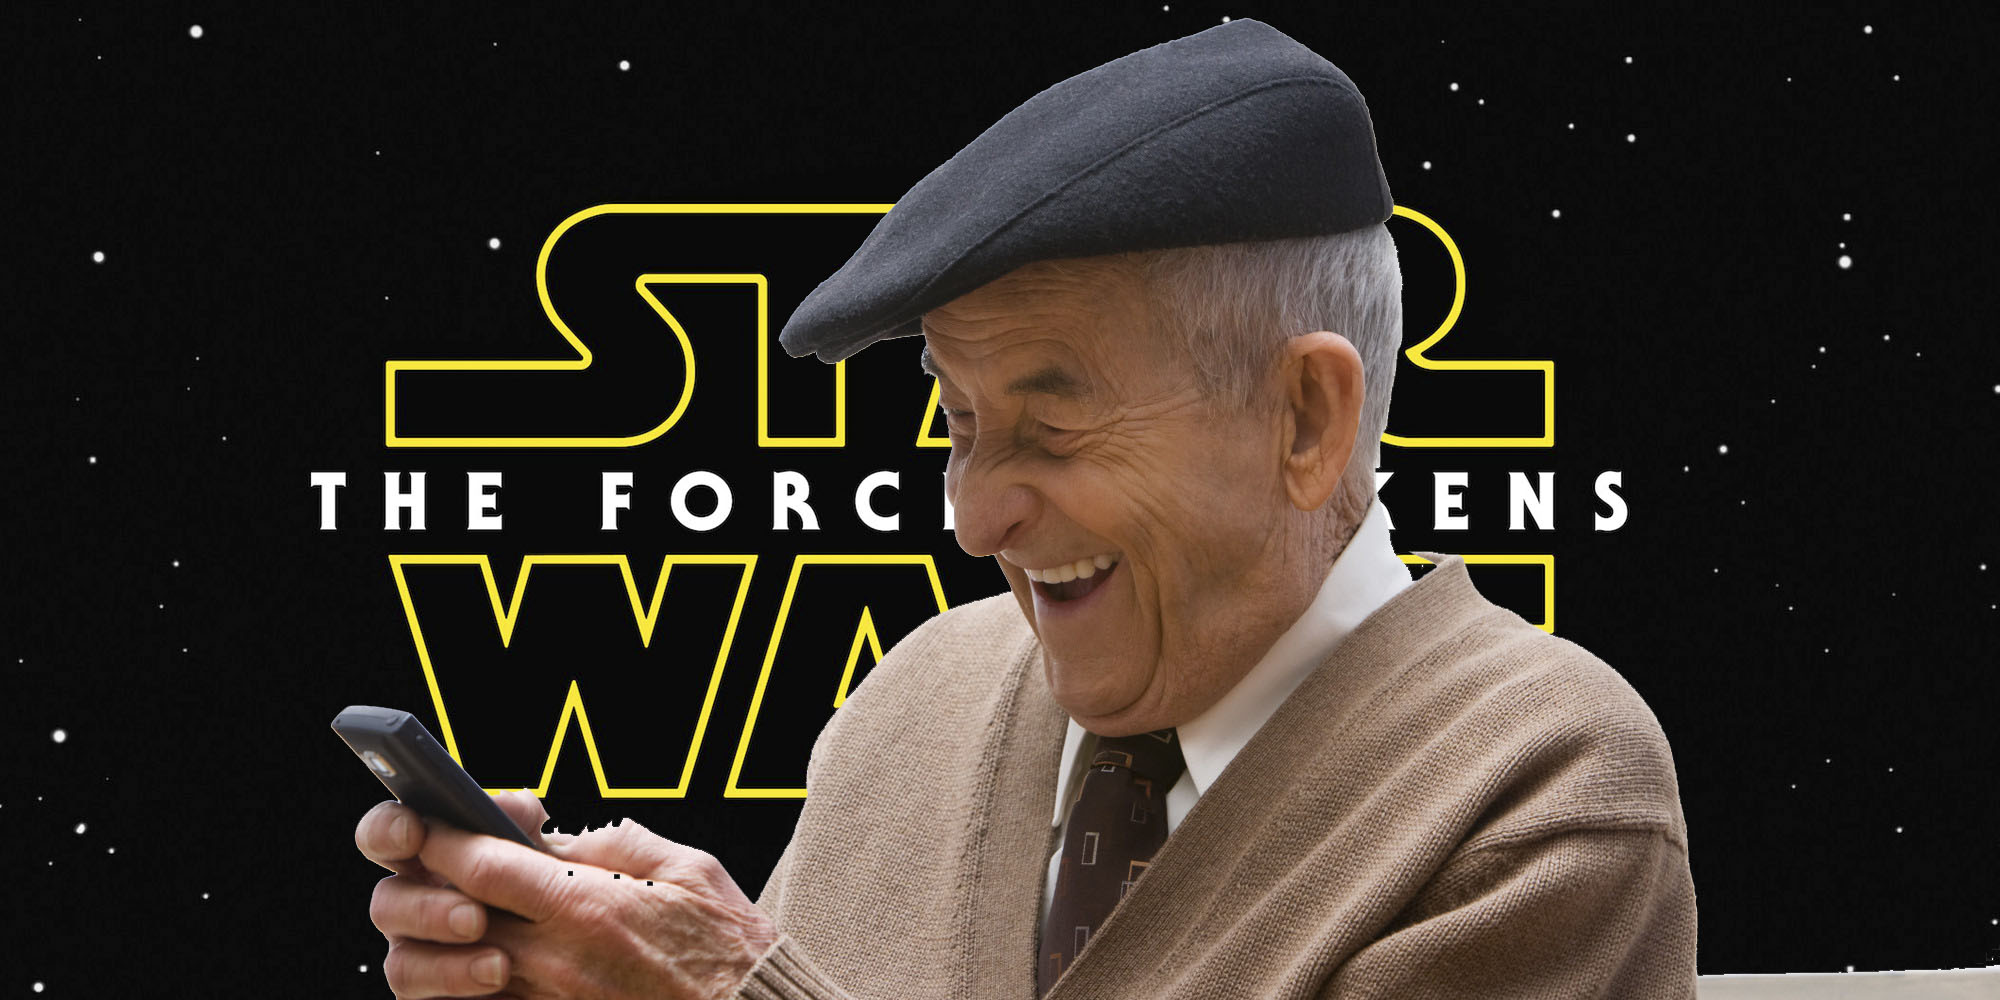 Man Sues Grandfather for Texting During The Force Awakens